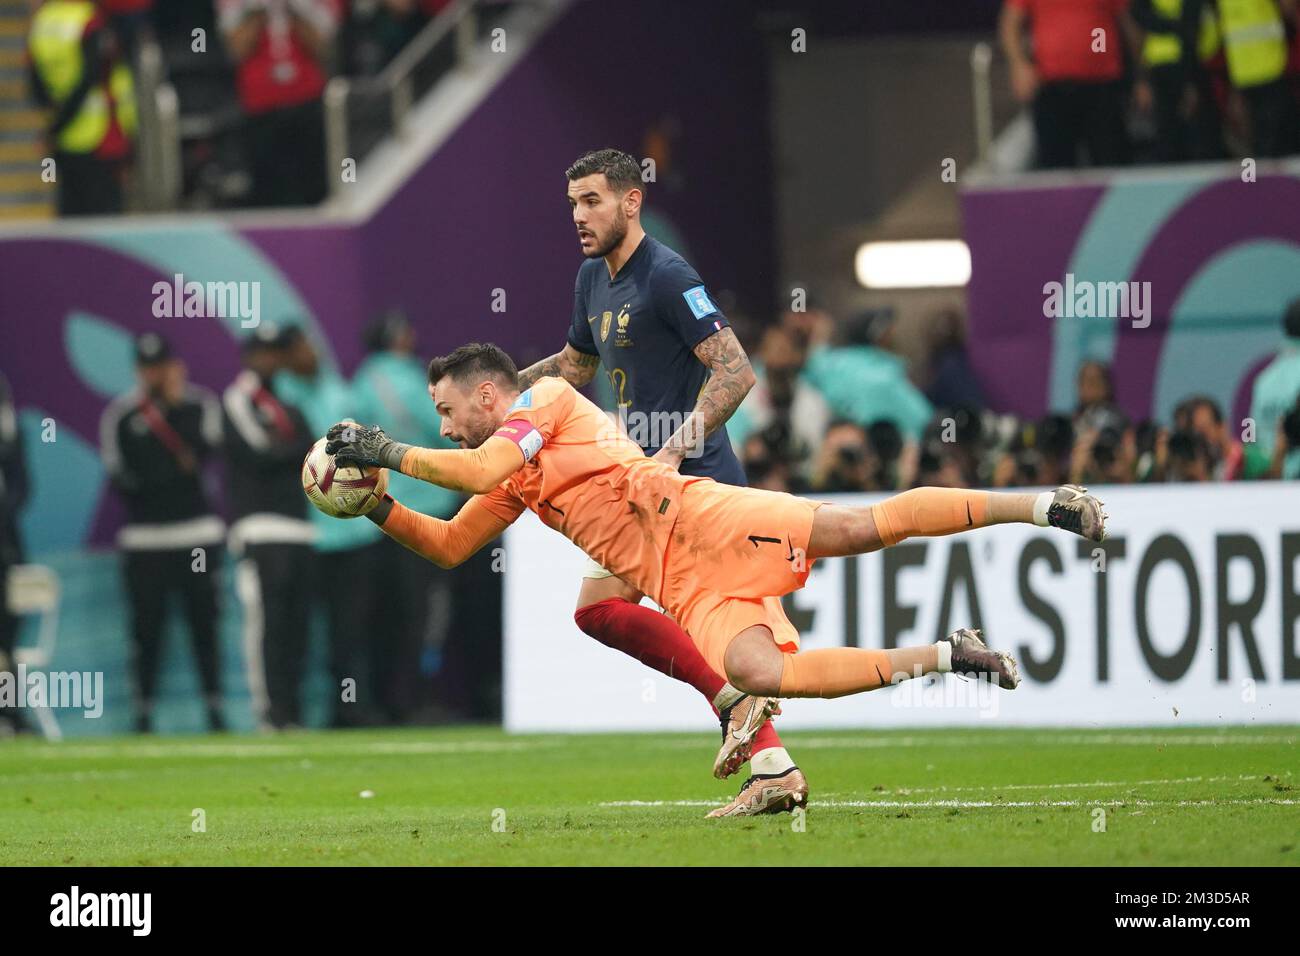 DOHA, QATAR - DECEMBER 14: Player of France Hugo Lloris saves the ball during the FIFA World Cup Qatar 2022 Semi-finals match between France and Morocco at Al Bayt Stadium on December 14, 2022 in Al Khor, Qatar. (Photo by Florencia Tan Jun/PxImages) Credit: Px Images/Alamy Live News Stock Photo